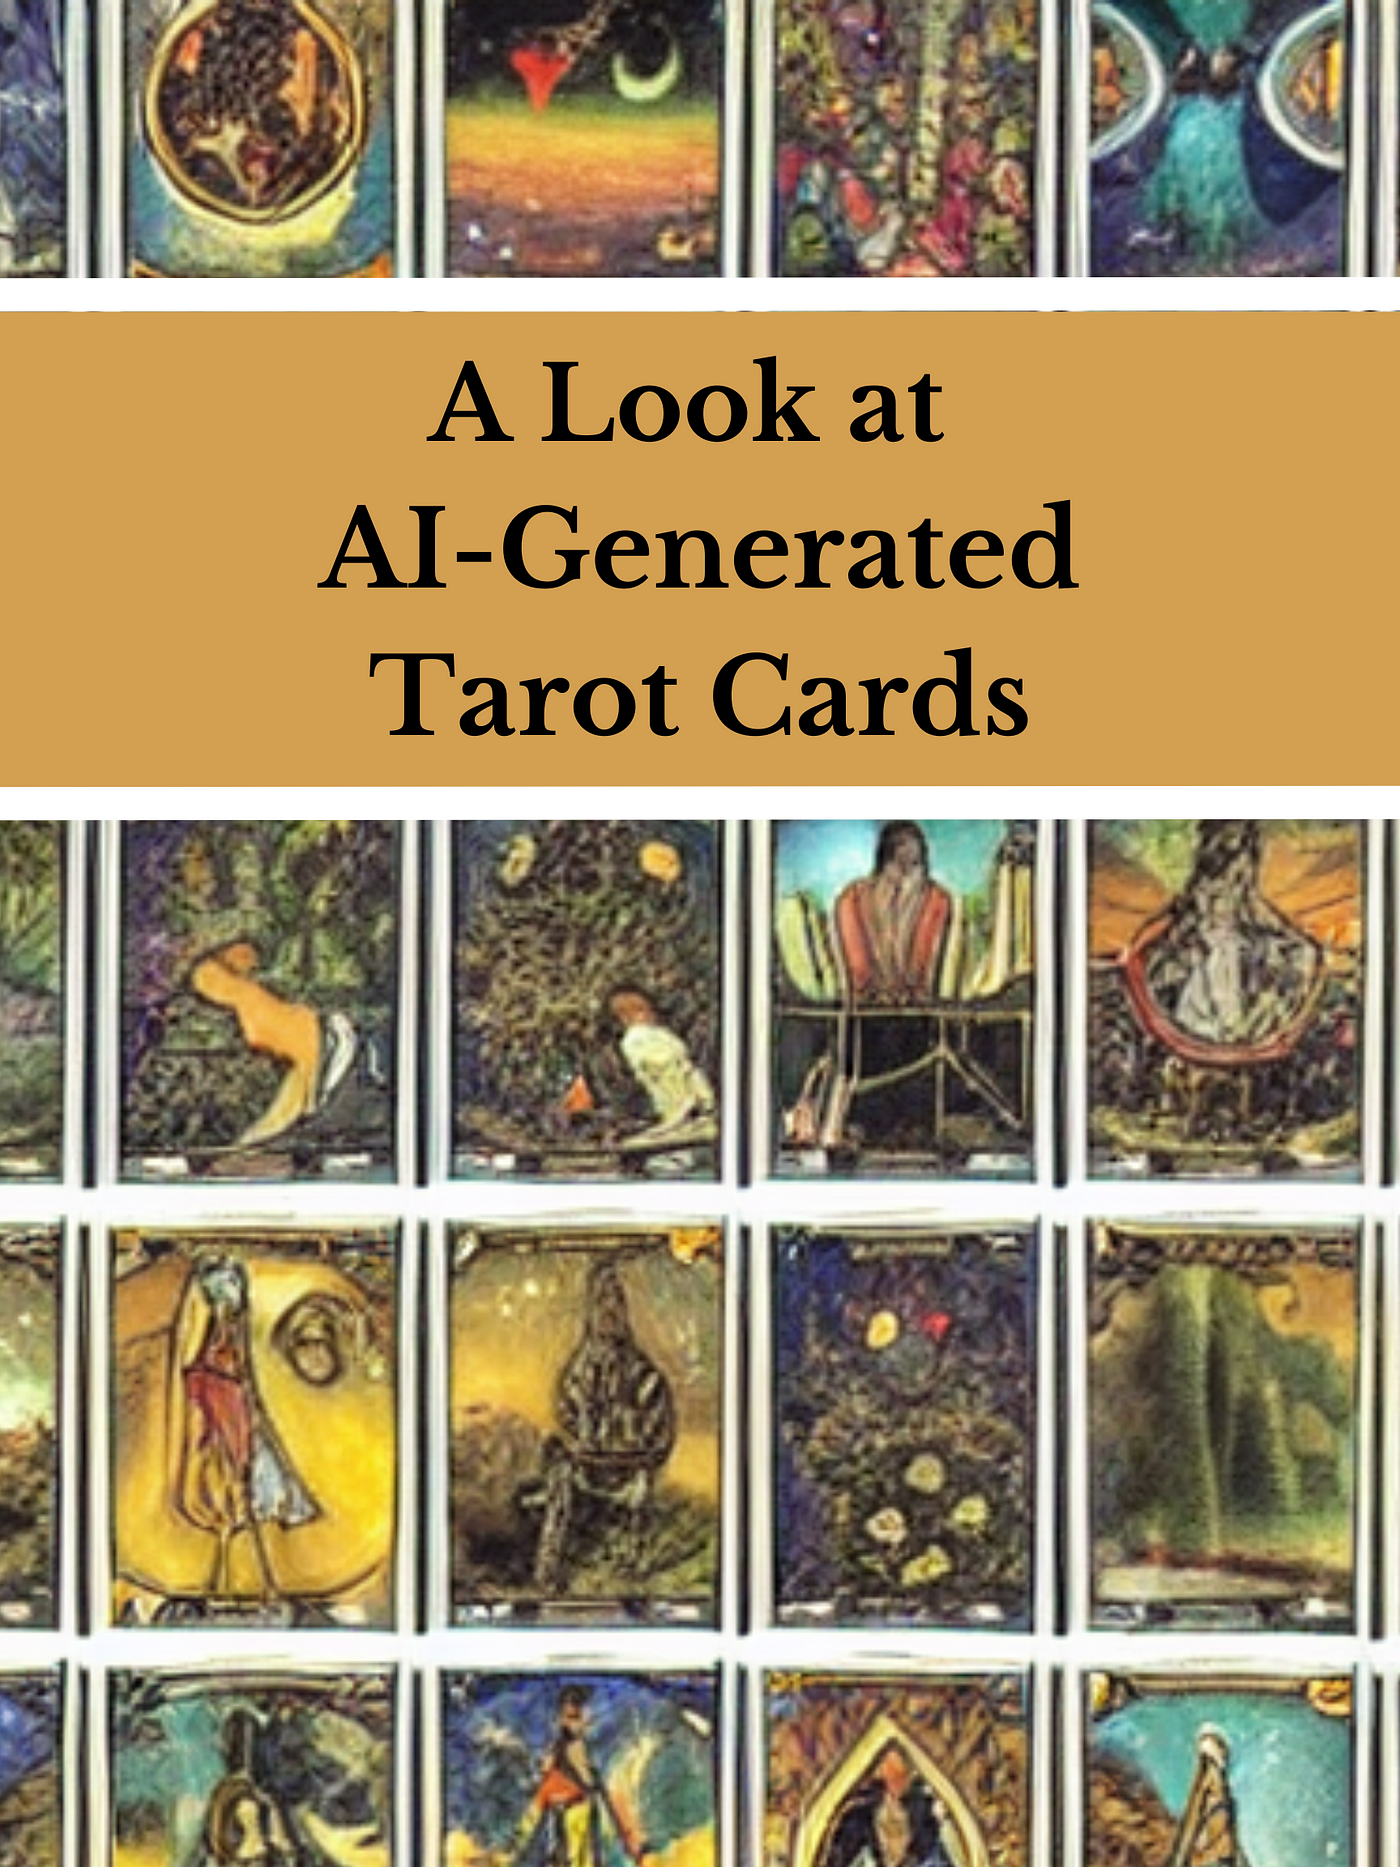 Hilariously Bad Tarot Cards Created by Canva's AI Image Generator by Andrea Lawrence | Jan, 2023 | Medium